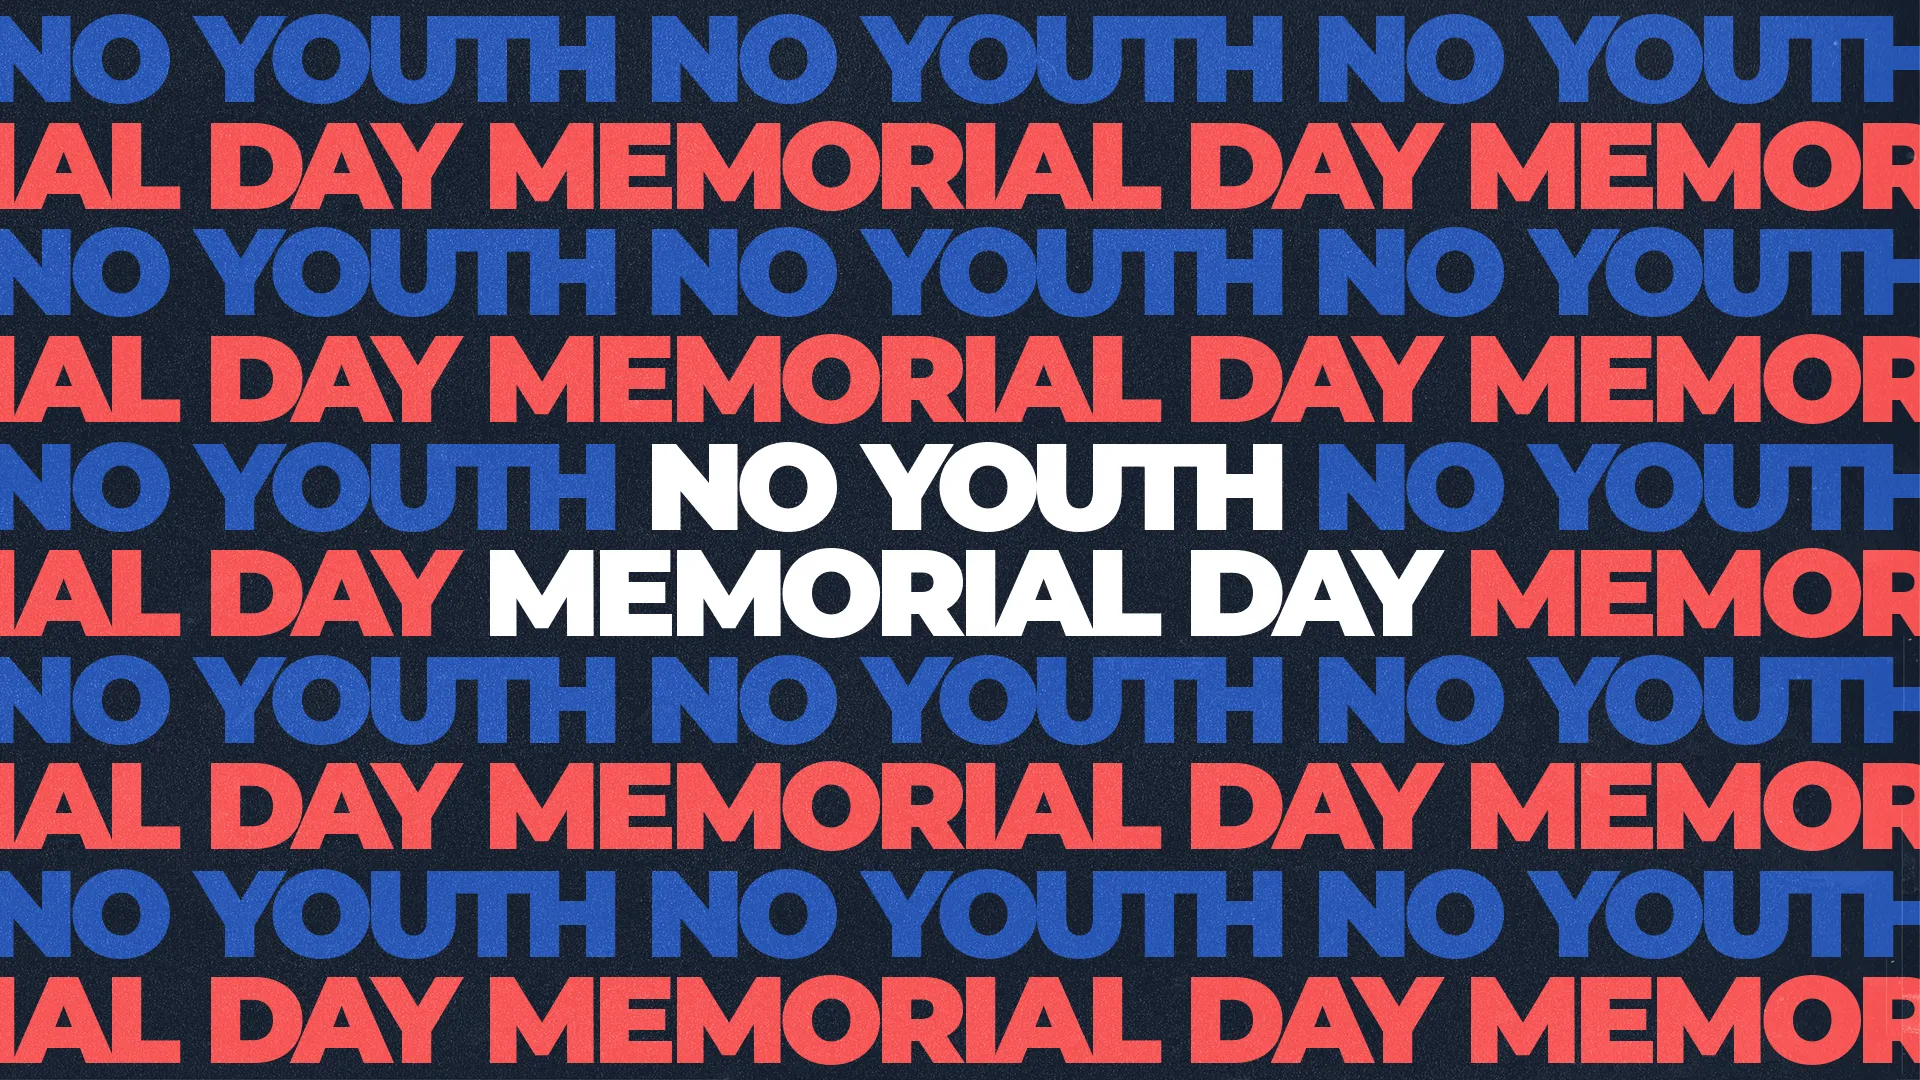 Mark The Observance Of Memorial Day With This Bold And Attention-Grabbing Graphic, Perfect For Reminding Your Youth Ministry Of The Importance Of This Day Of Remembrance Within Your Church Community.